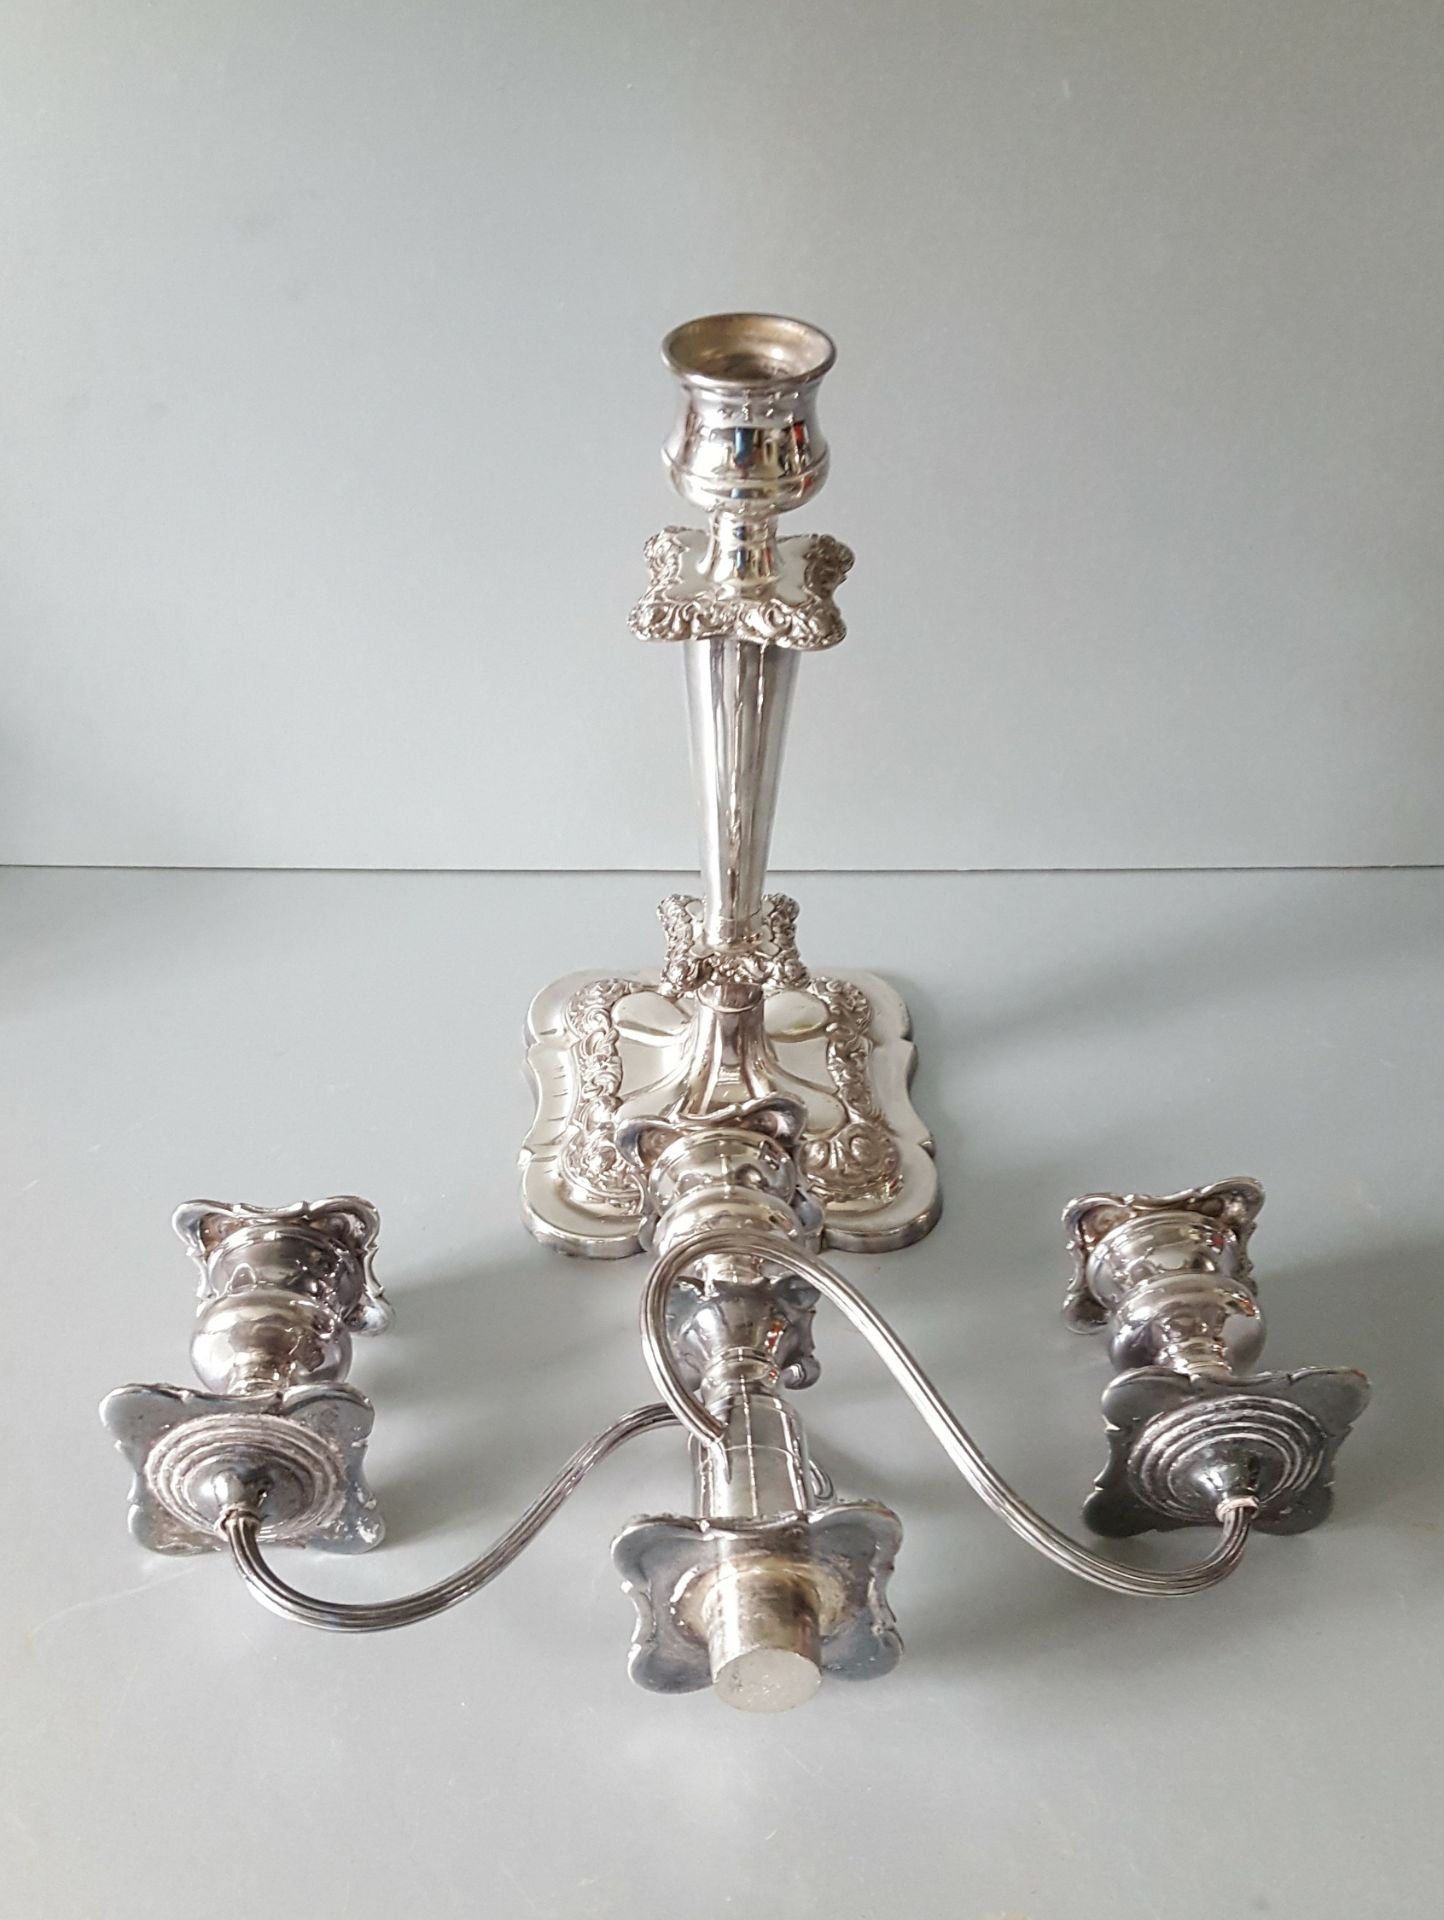 Vintage Retro 2 x Candelabra Silver Plated - Image 3 of 4